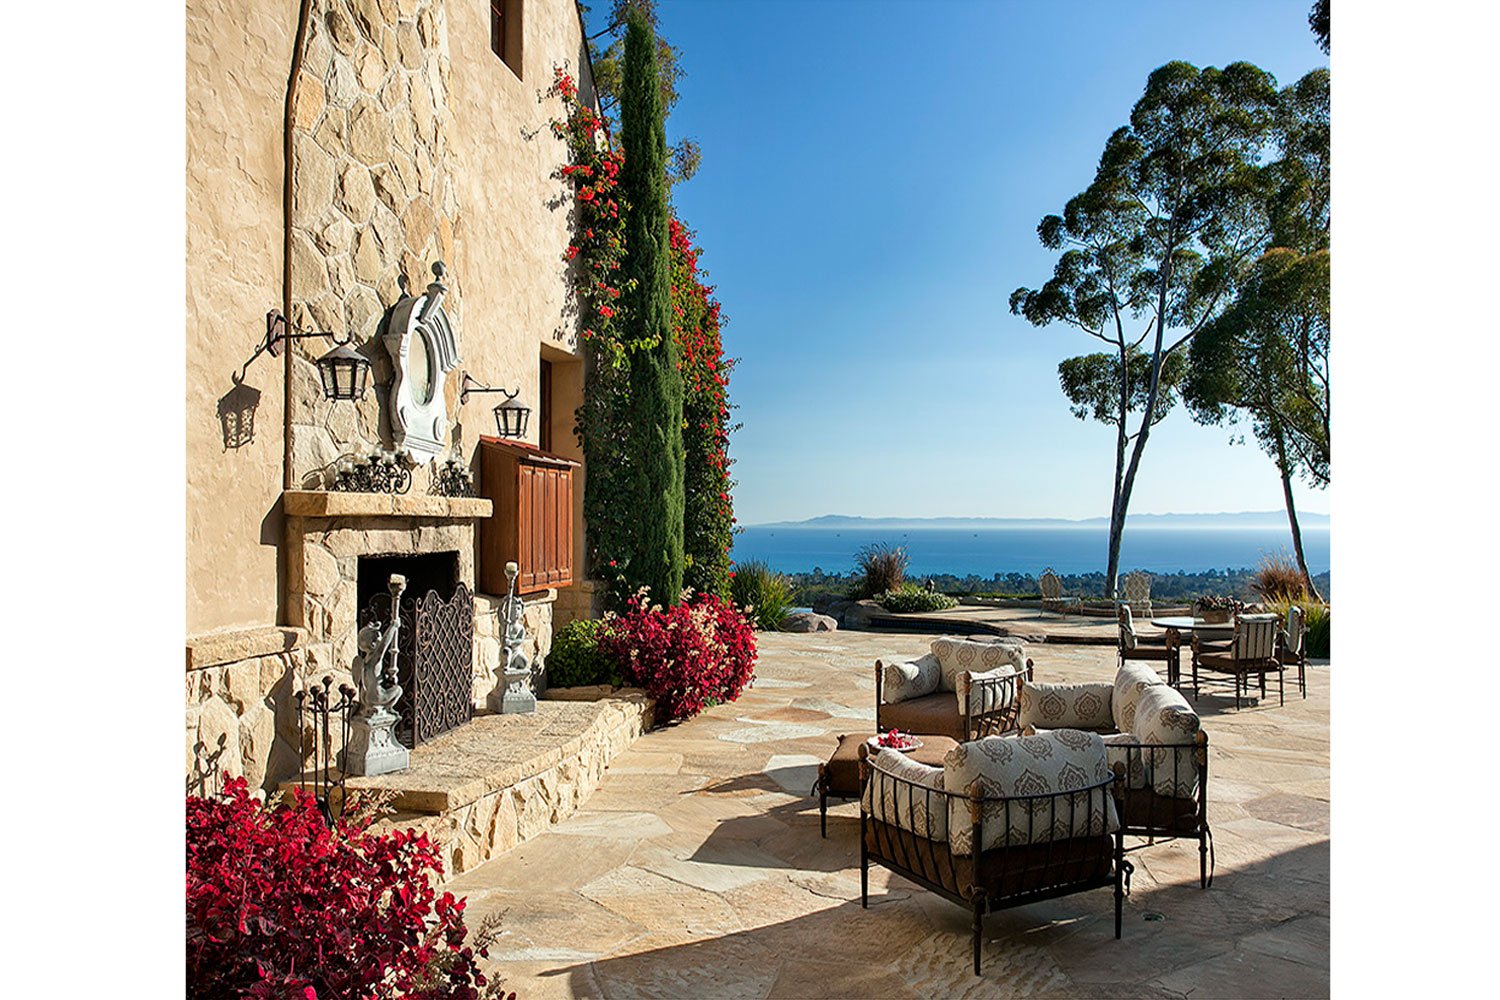 montecito-foothills-traditional-architecture.jpg